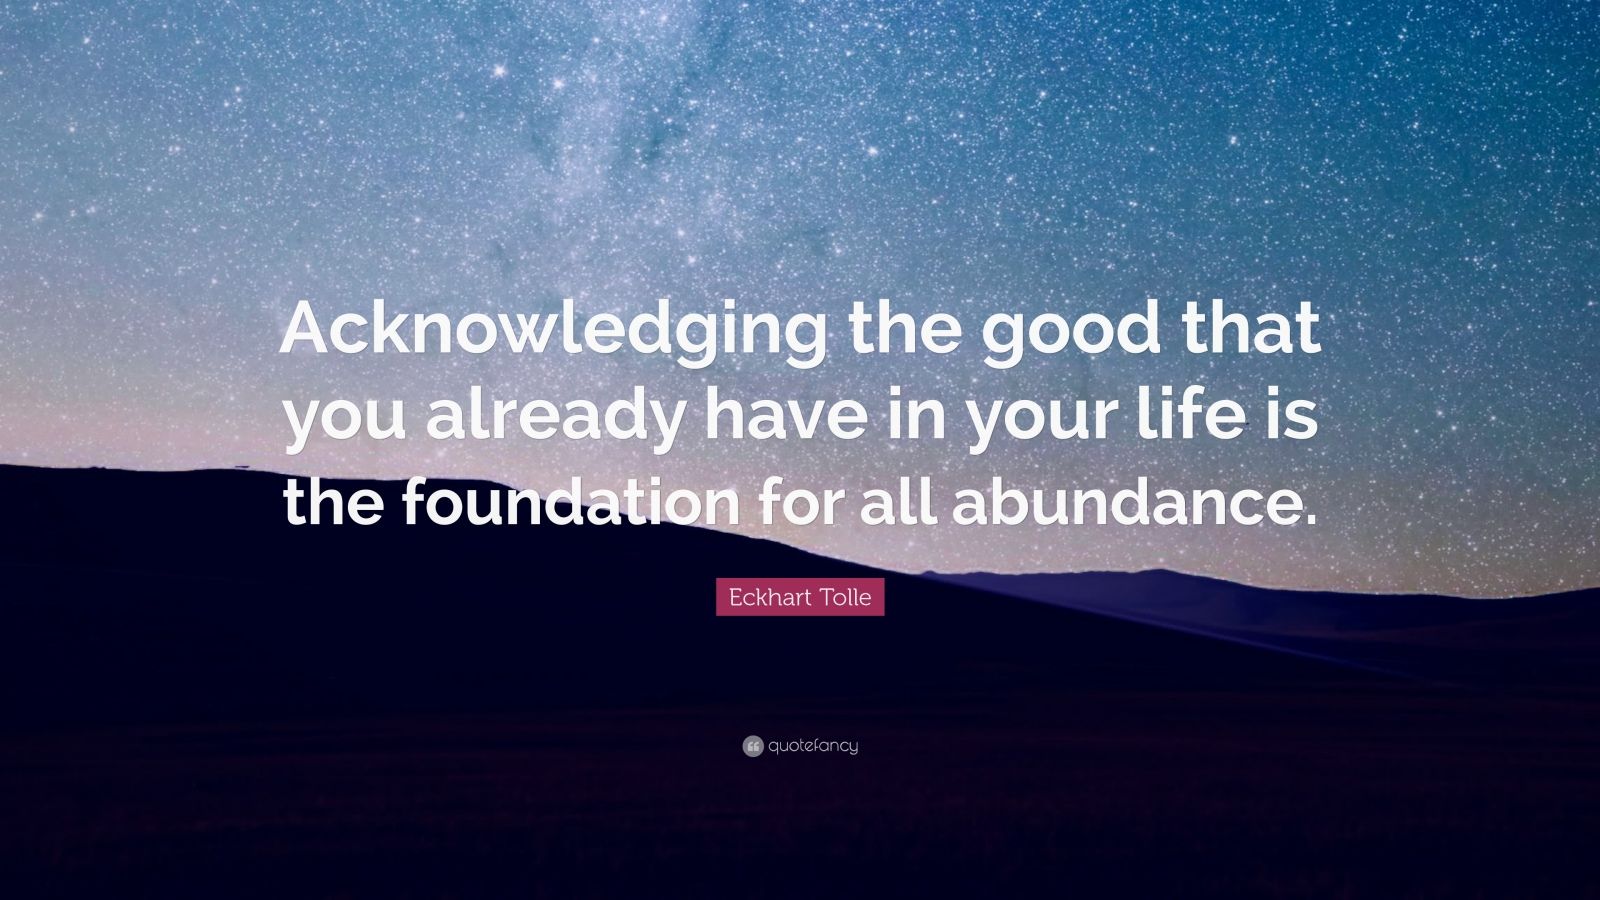 Eckhart Tolle Quote: “Acknowledging the good that you already have in ...